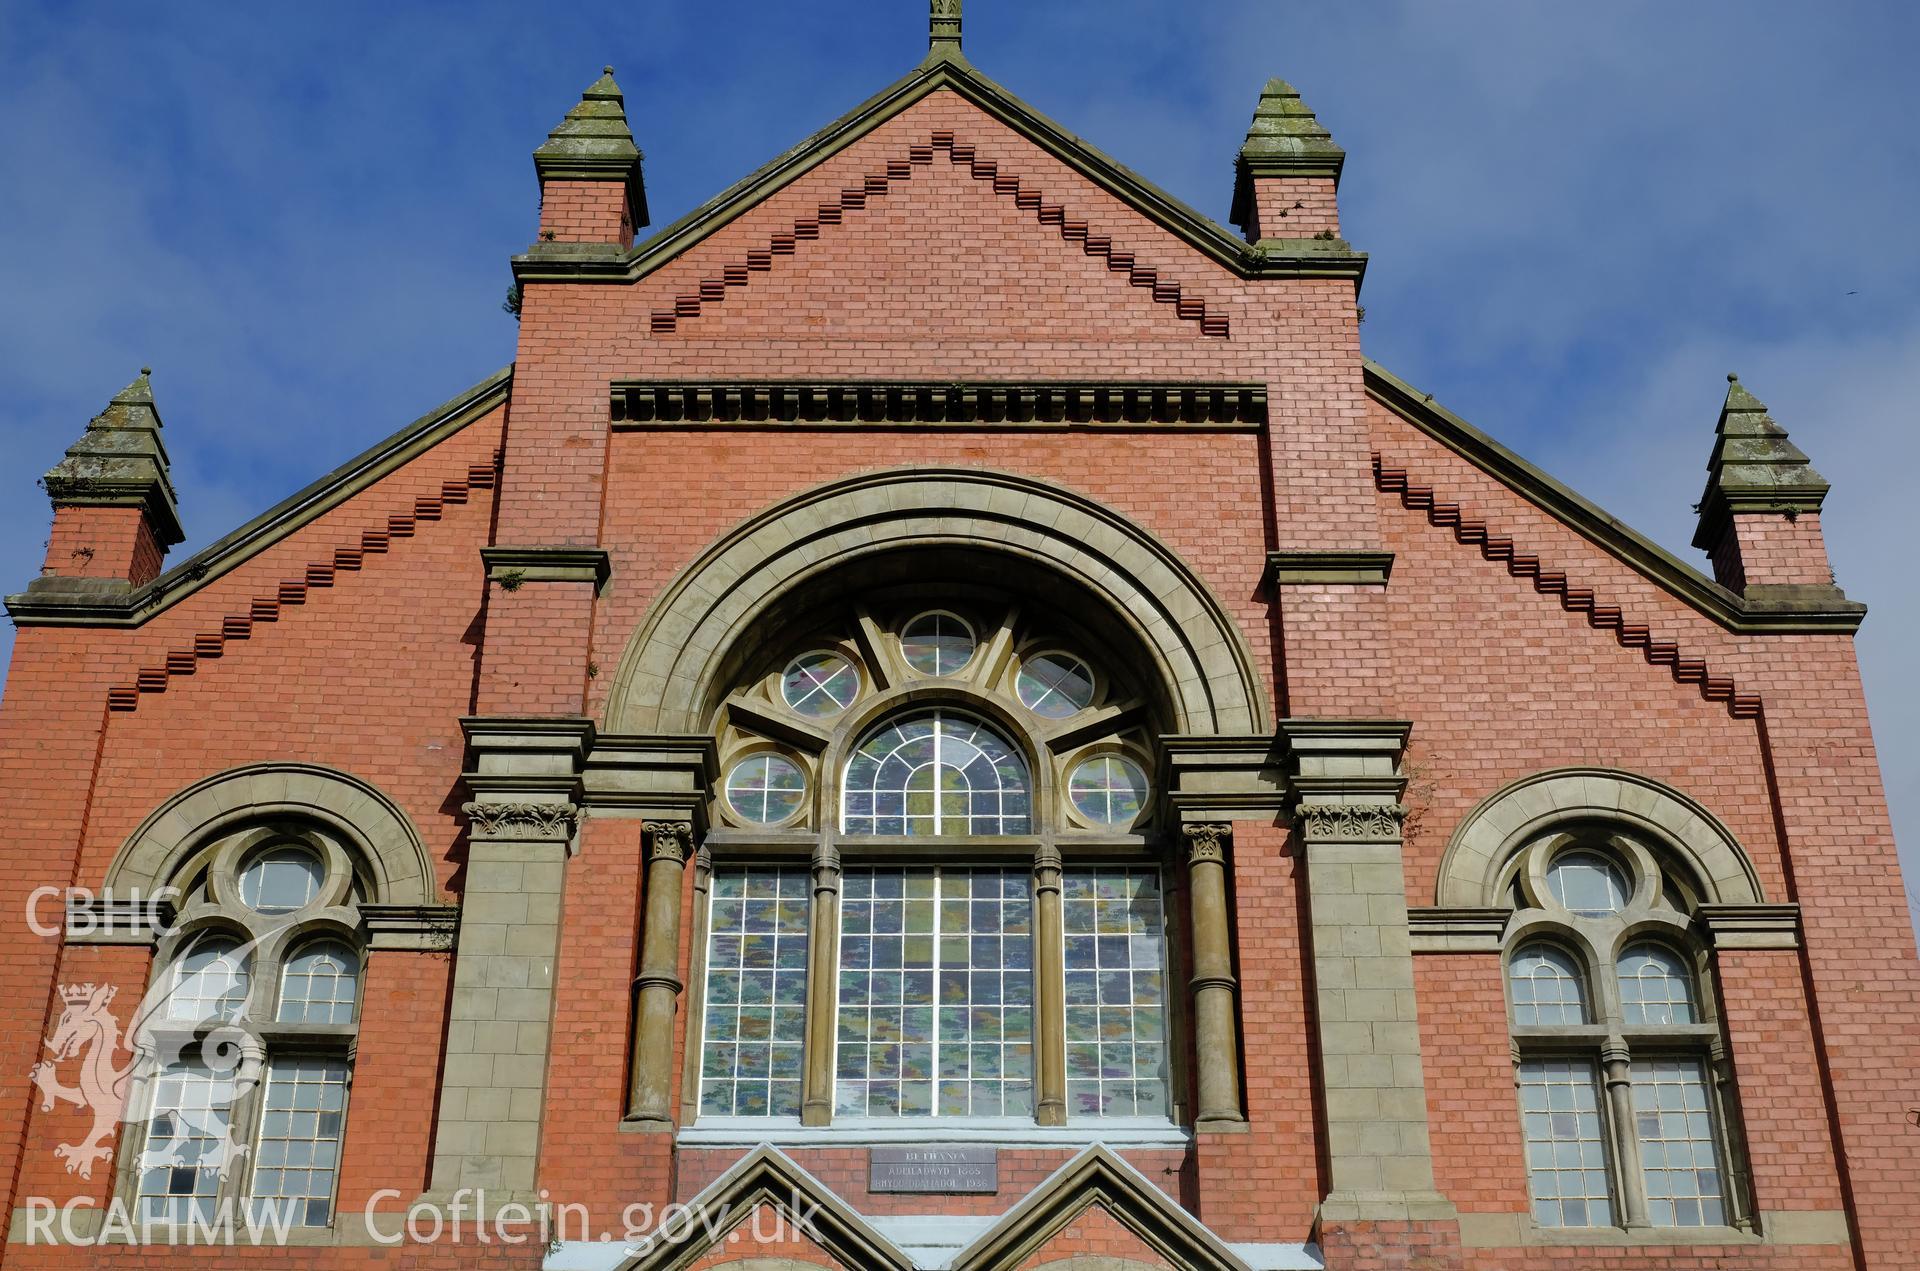 Colour photograph showing detail of Capel Bethania, Bethesda's facade, produced by Richard Hayman 16th March 2017